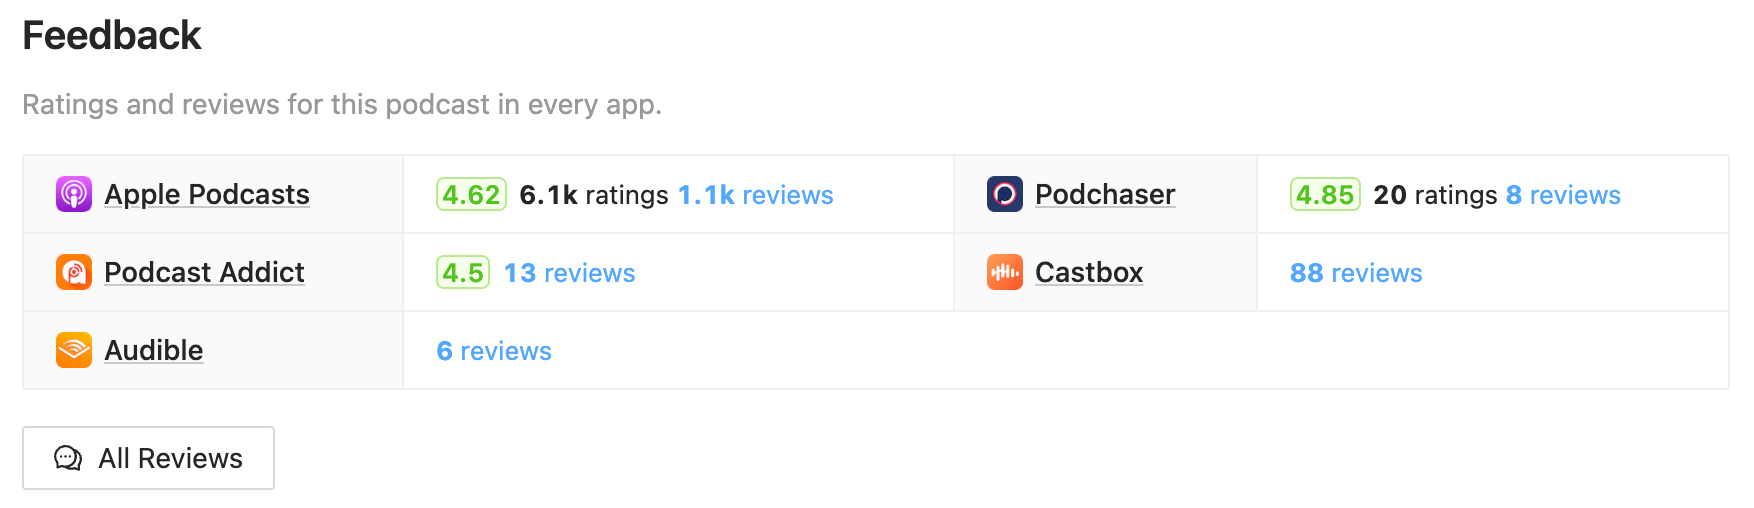 Podcast ratings and reviews on Rephonic